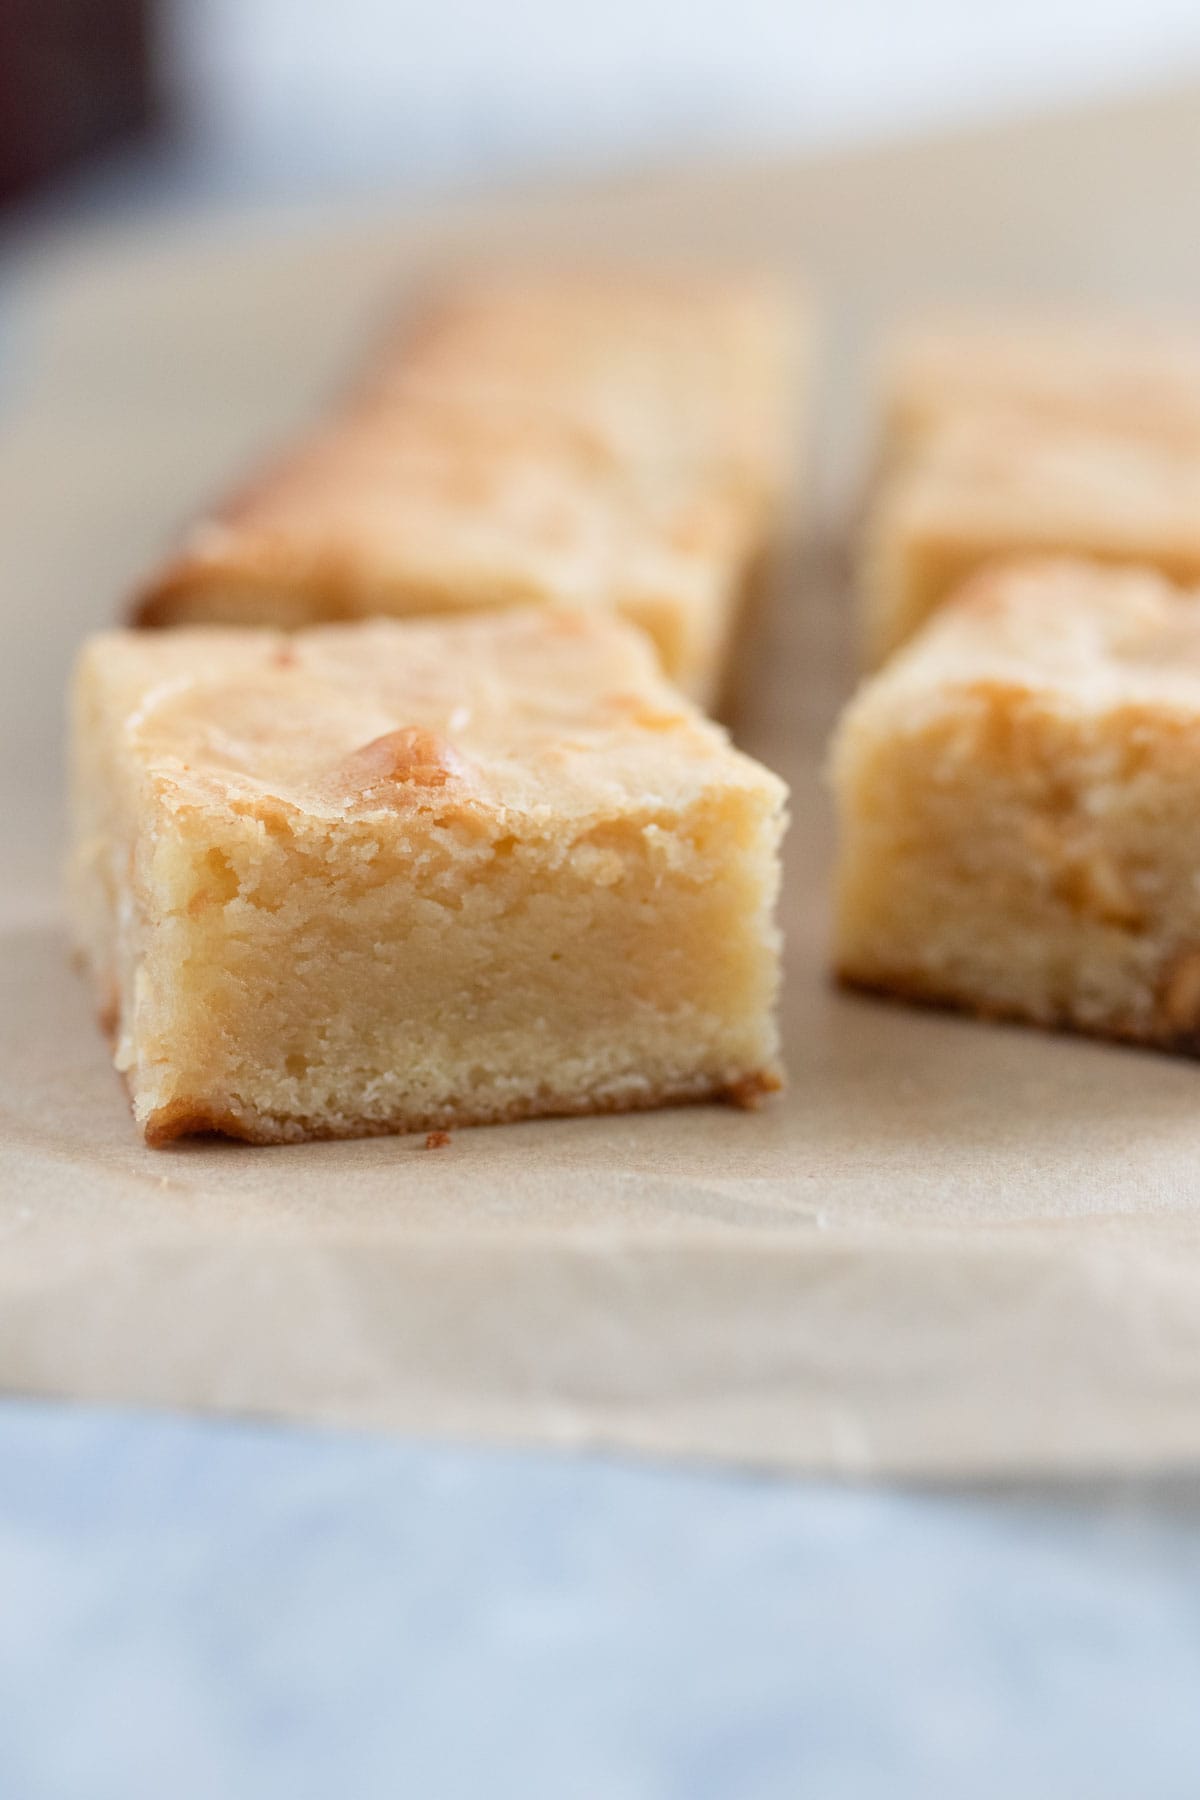 A sliced white chocolate blondie to show the gooey texture.